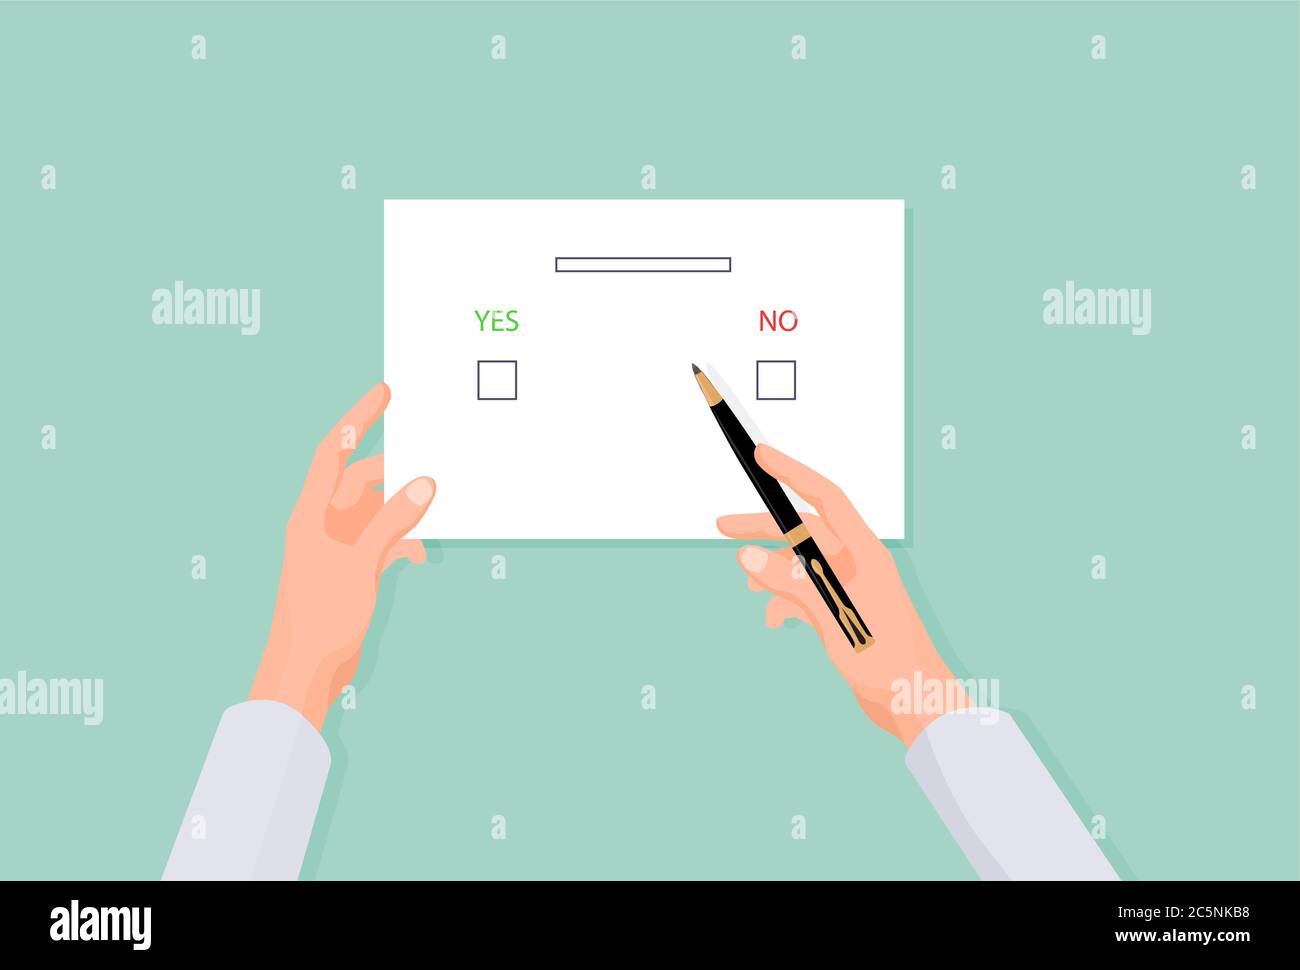 Hands holding an election form. Voting with yes or no choice when electing parties and president. Stock Vector